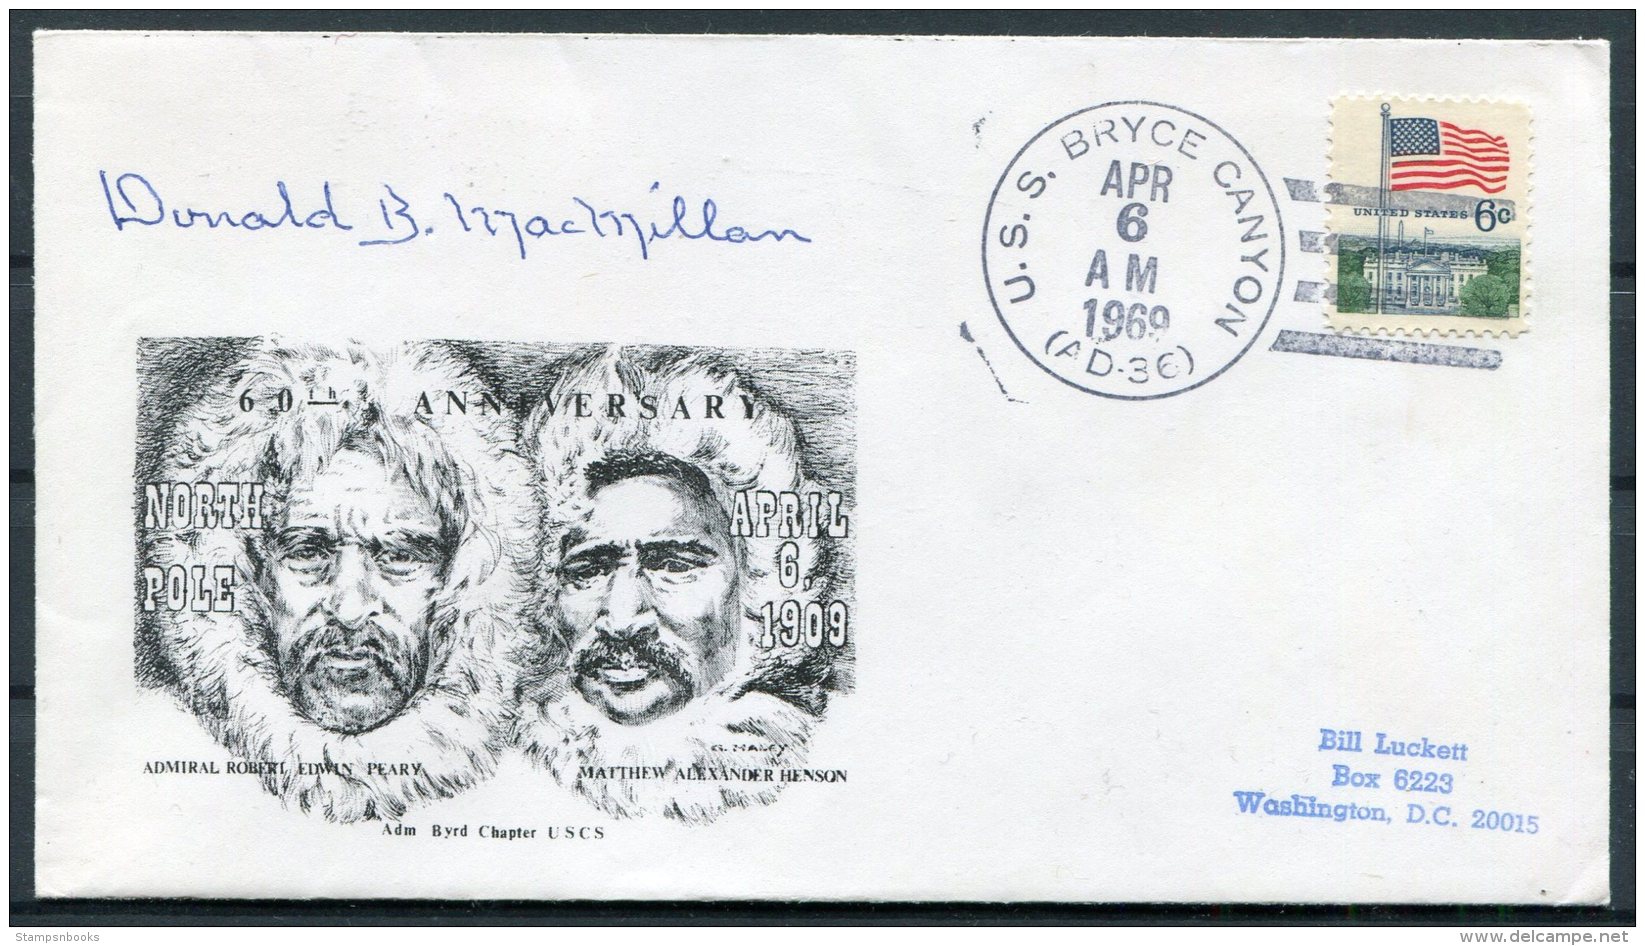 1969 USA Peary Arctic Expedition Ship Cover. Donald B MacMillan SIGNED. USS Bryce Canyon - Polar Explorers & Famous People